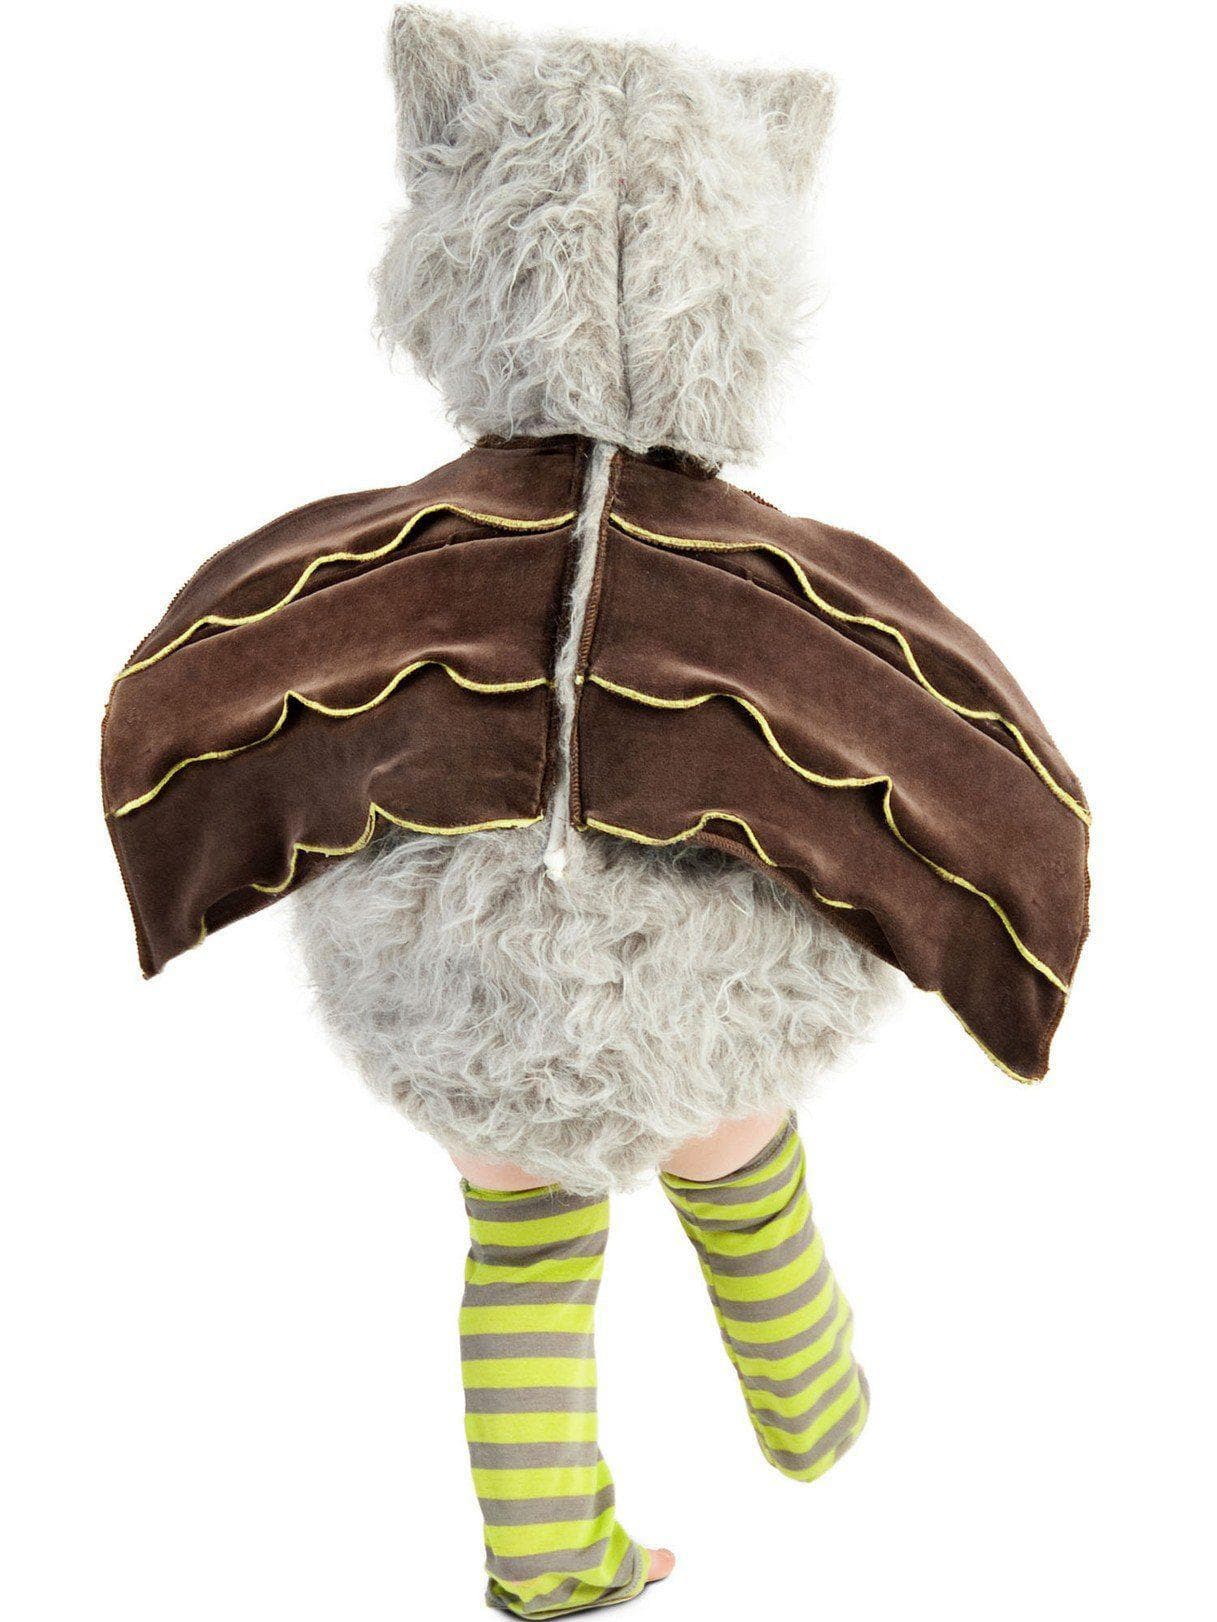 Baby/Toddler Edward the Owl Costume - costumes.com